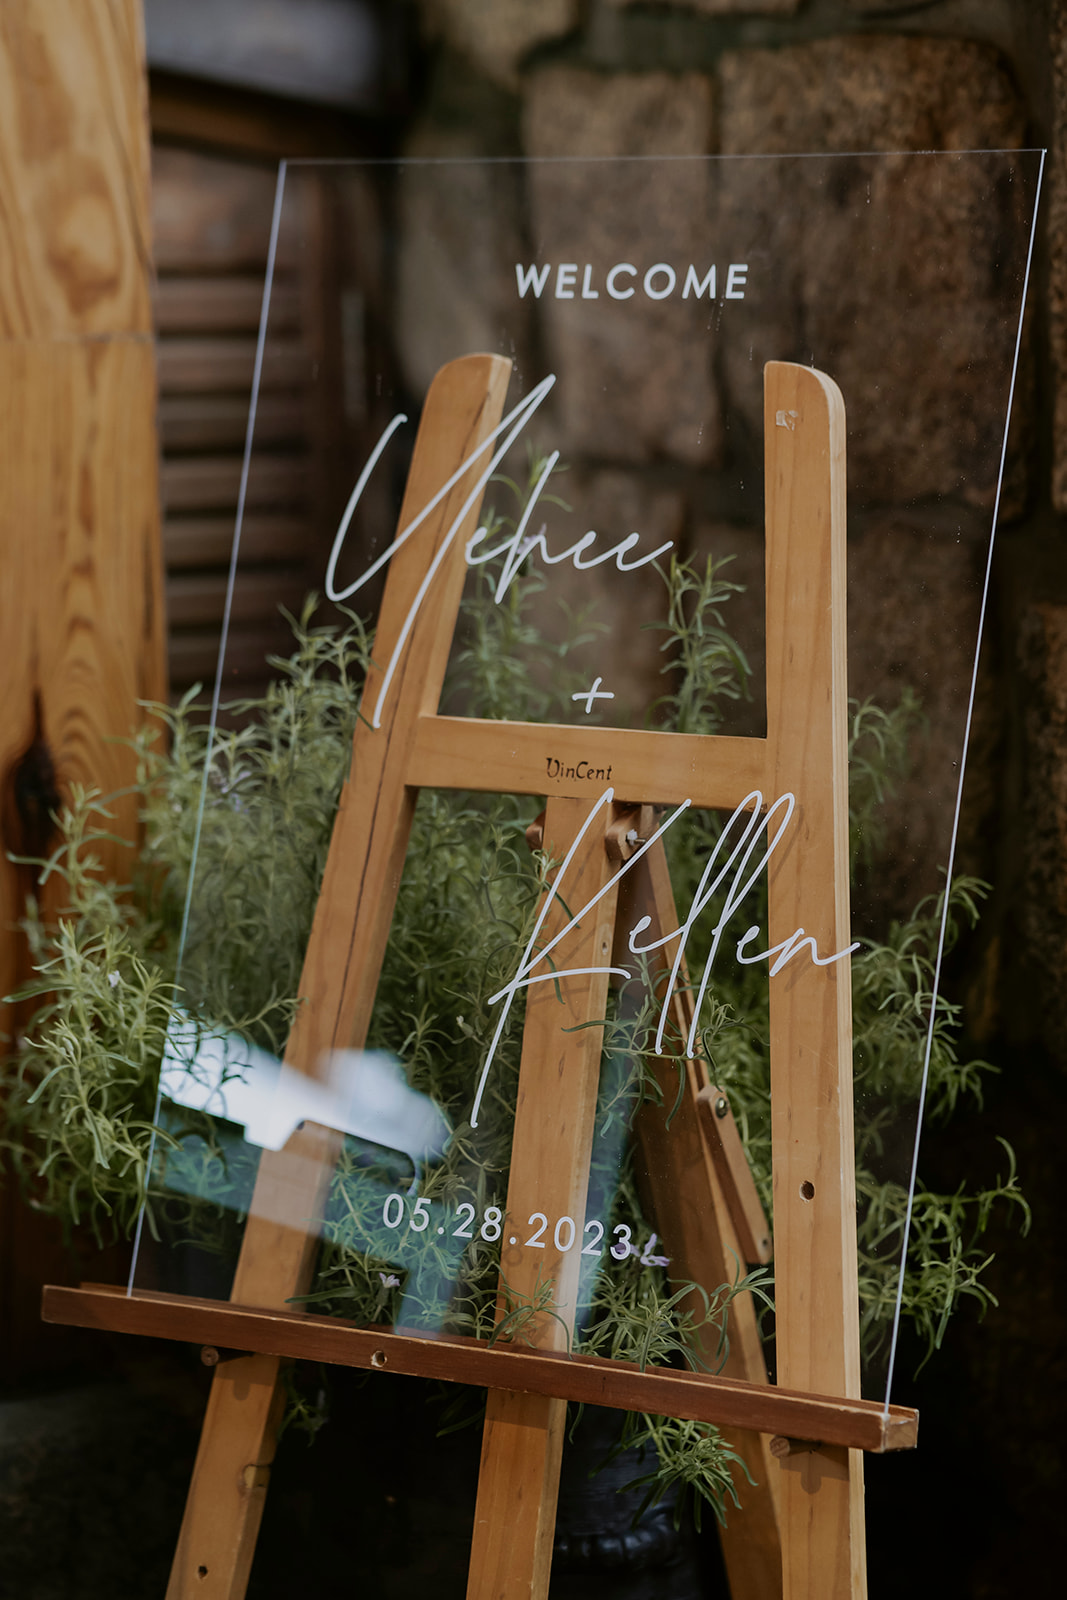 A welcome sign on an easel next to a potted plant in Seoul, Korea.